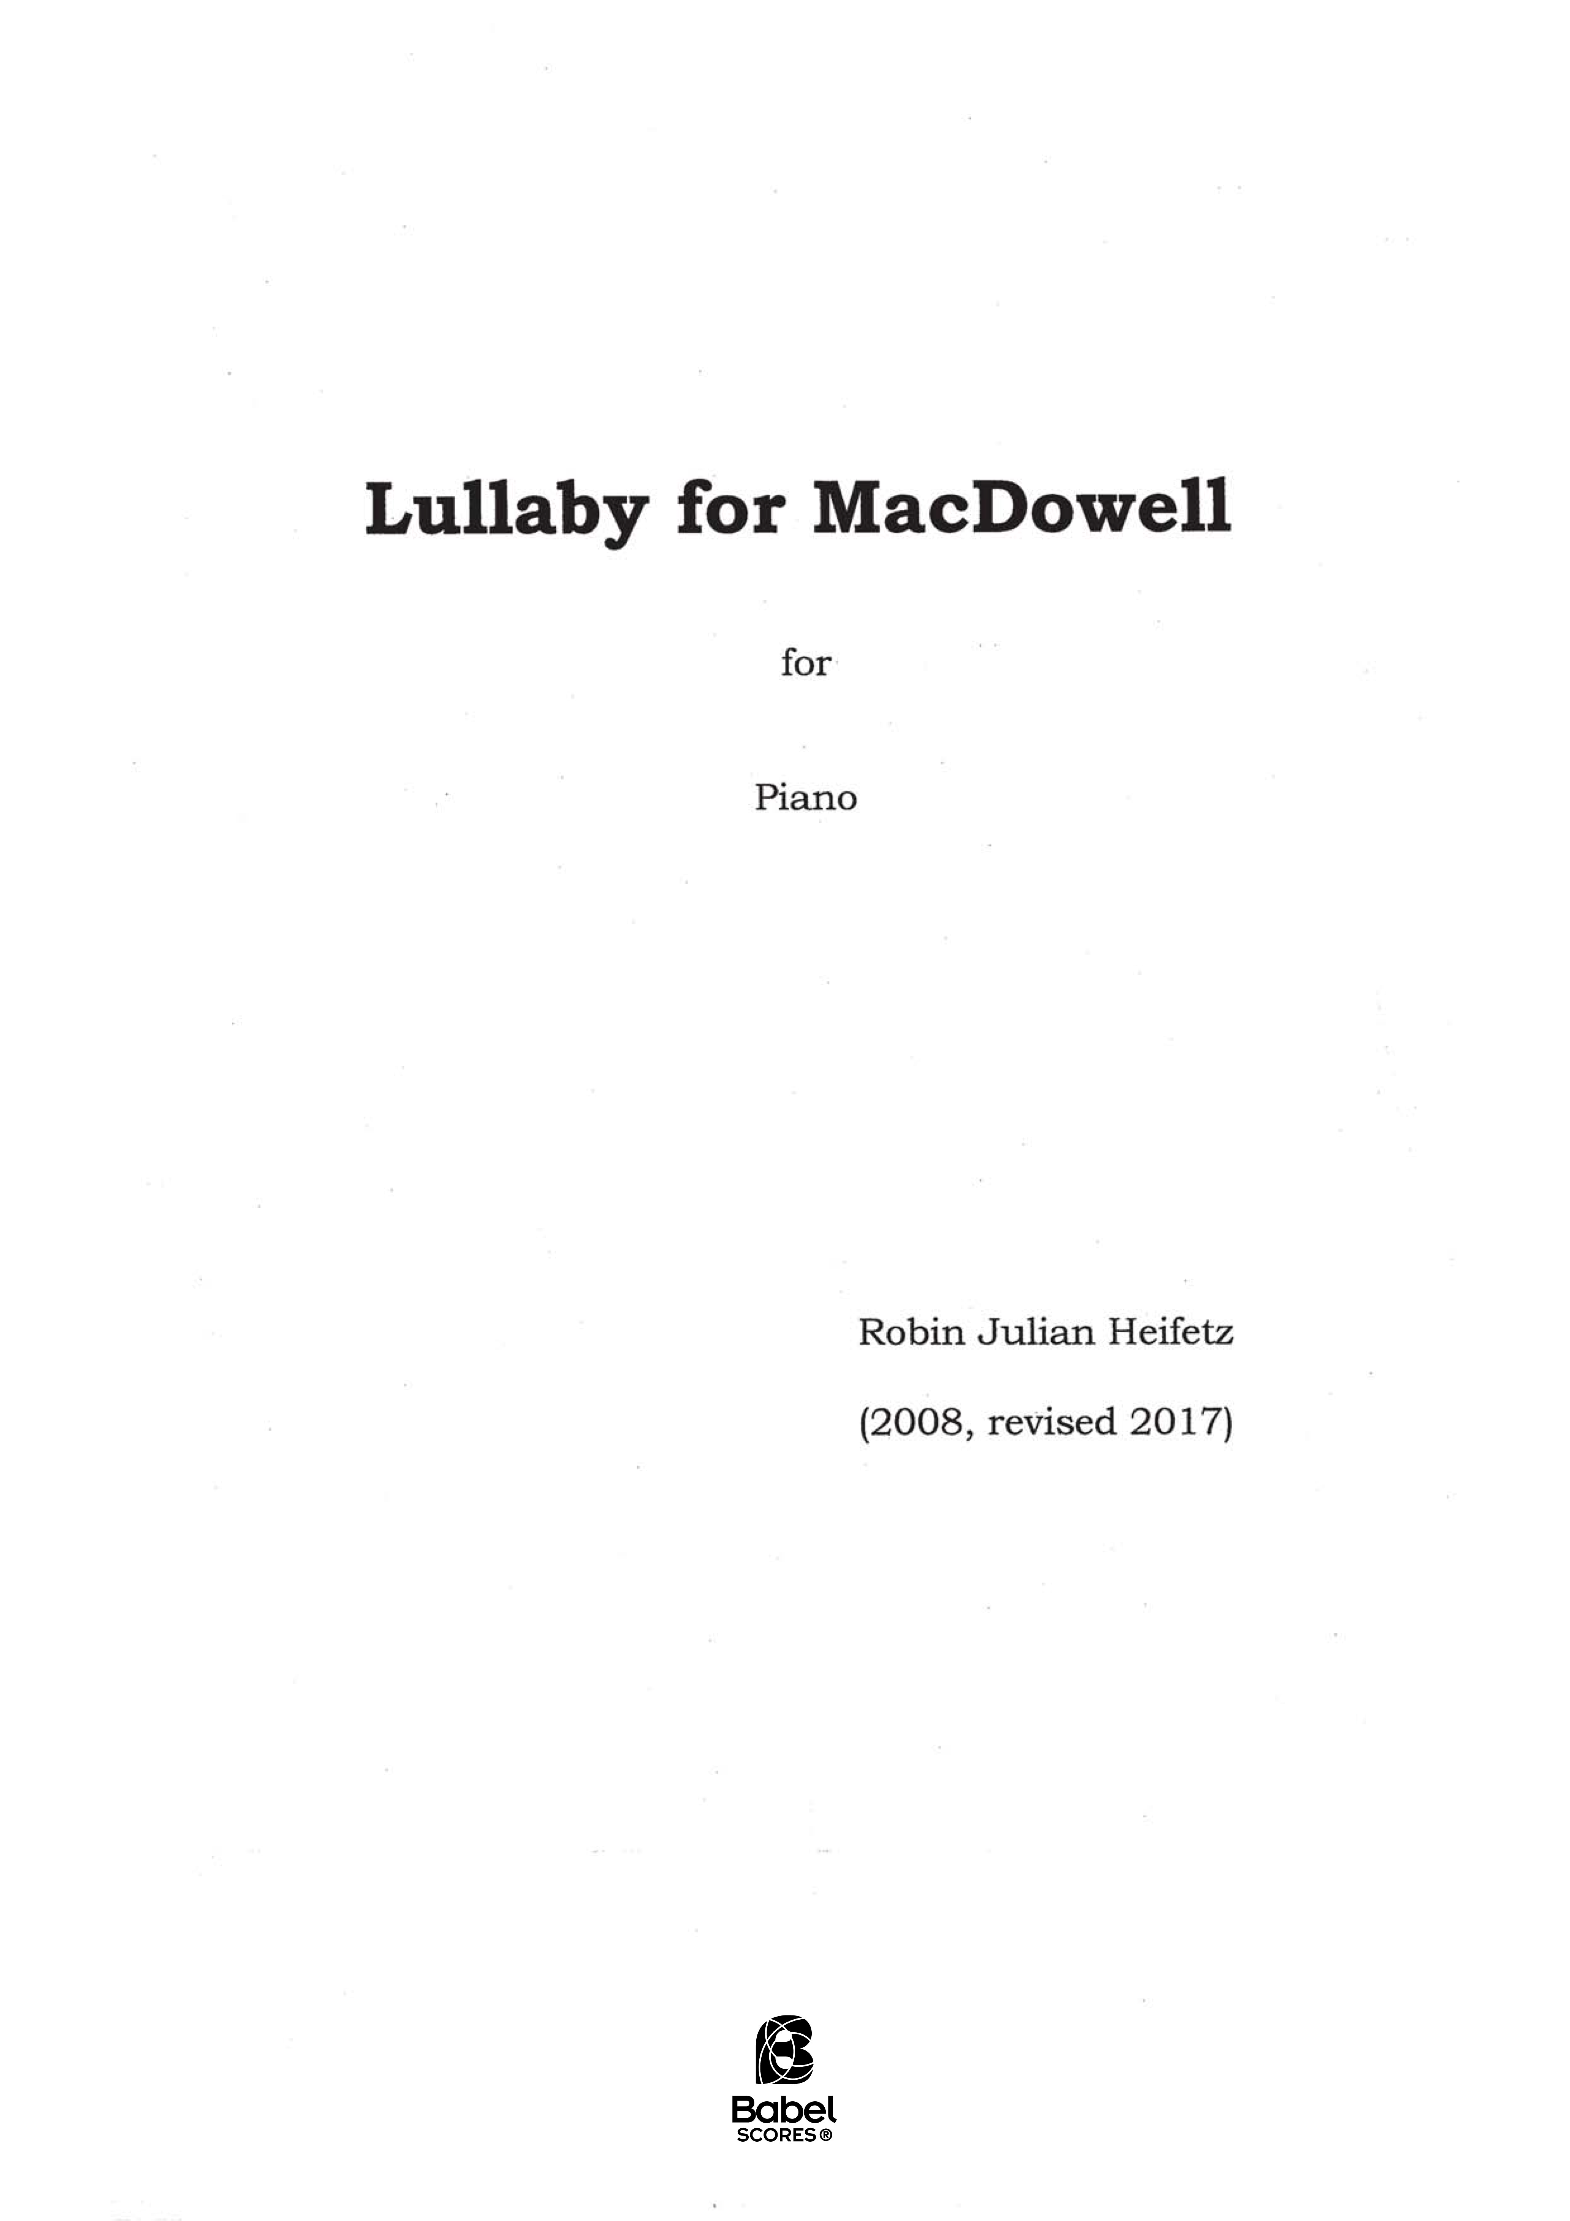 Lullaby for MacDowell A4 z 2 191 1 341